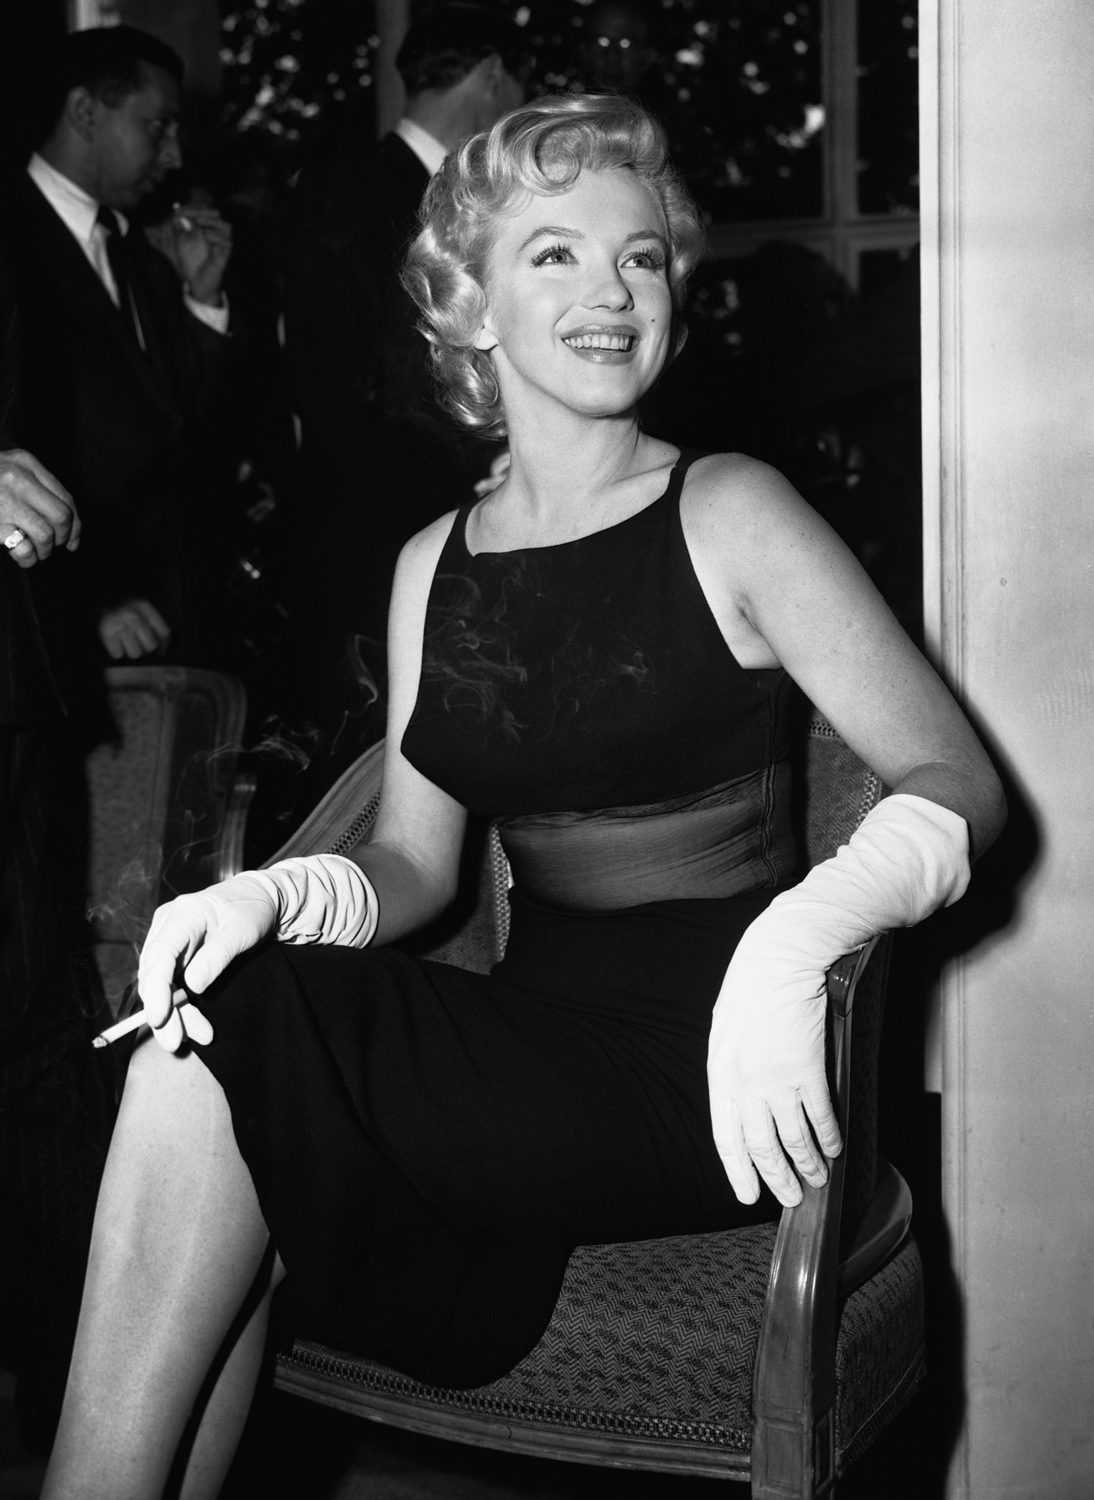 Monroe smiles during a press conference at the Savoy Hotel in London in July 1956.